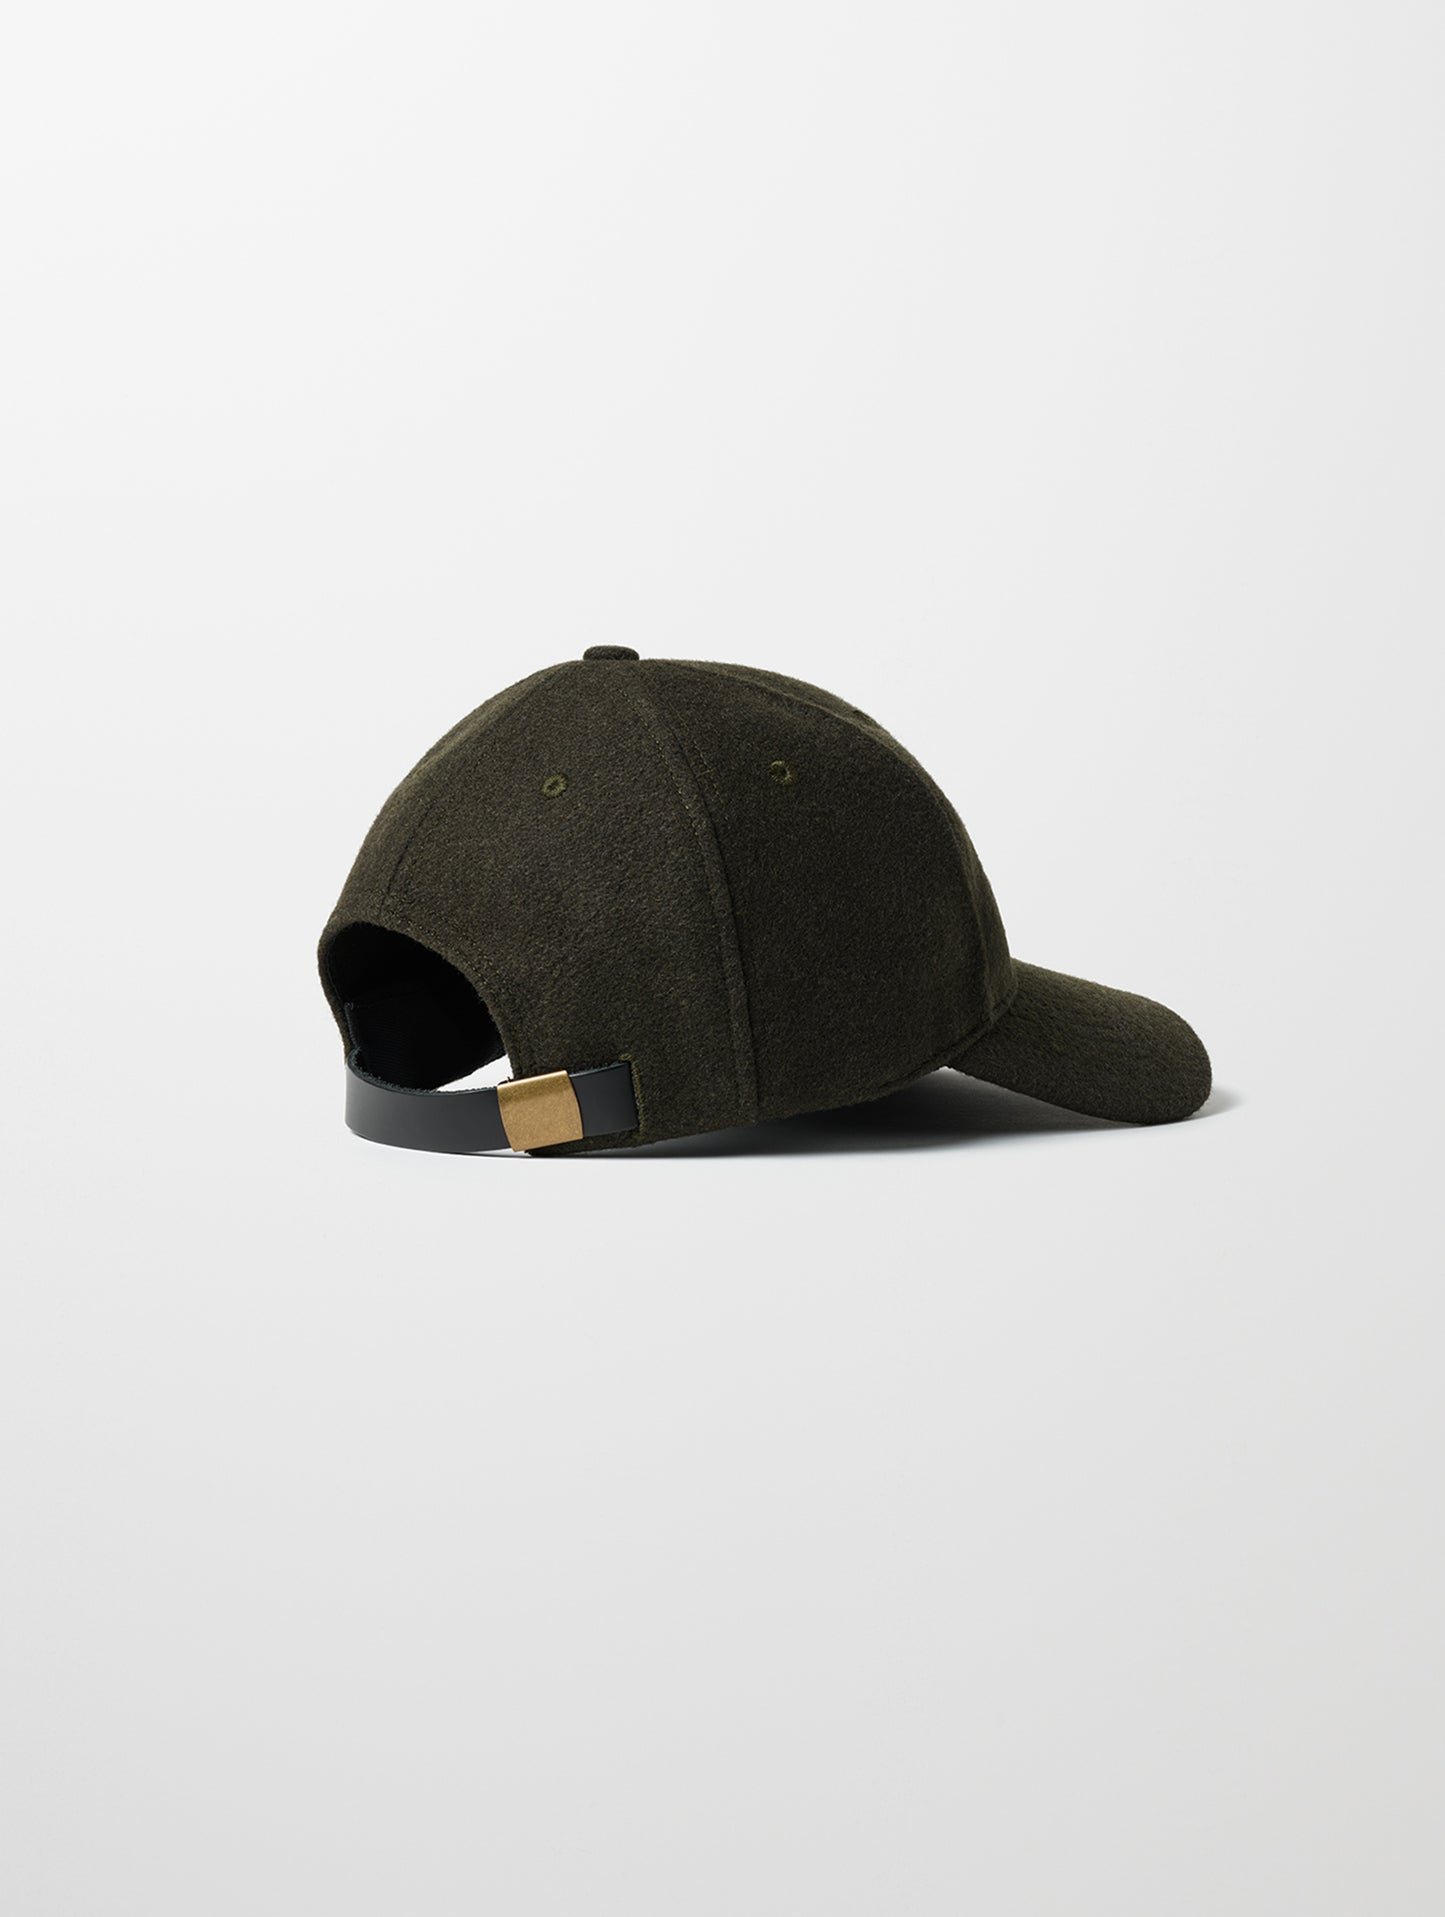 Back of green wool hat from AETHER Apparel